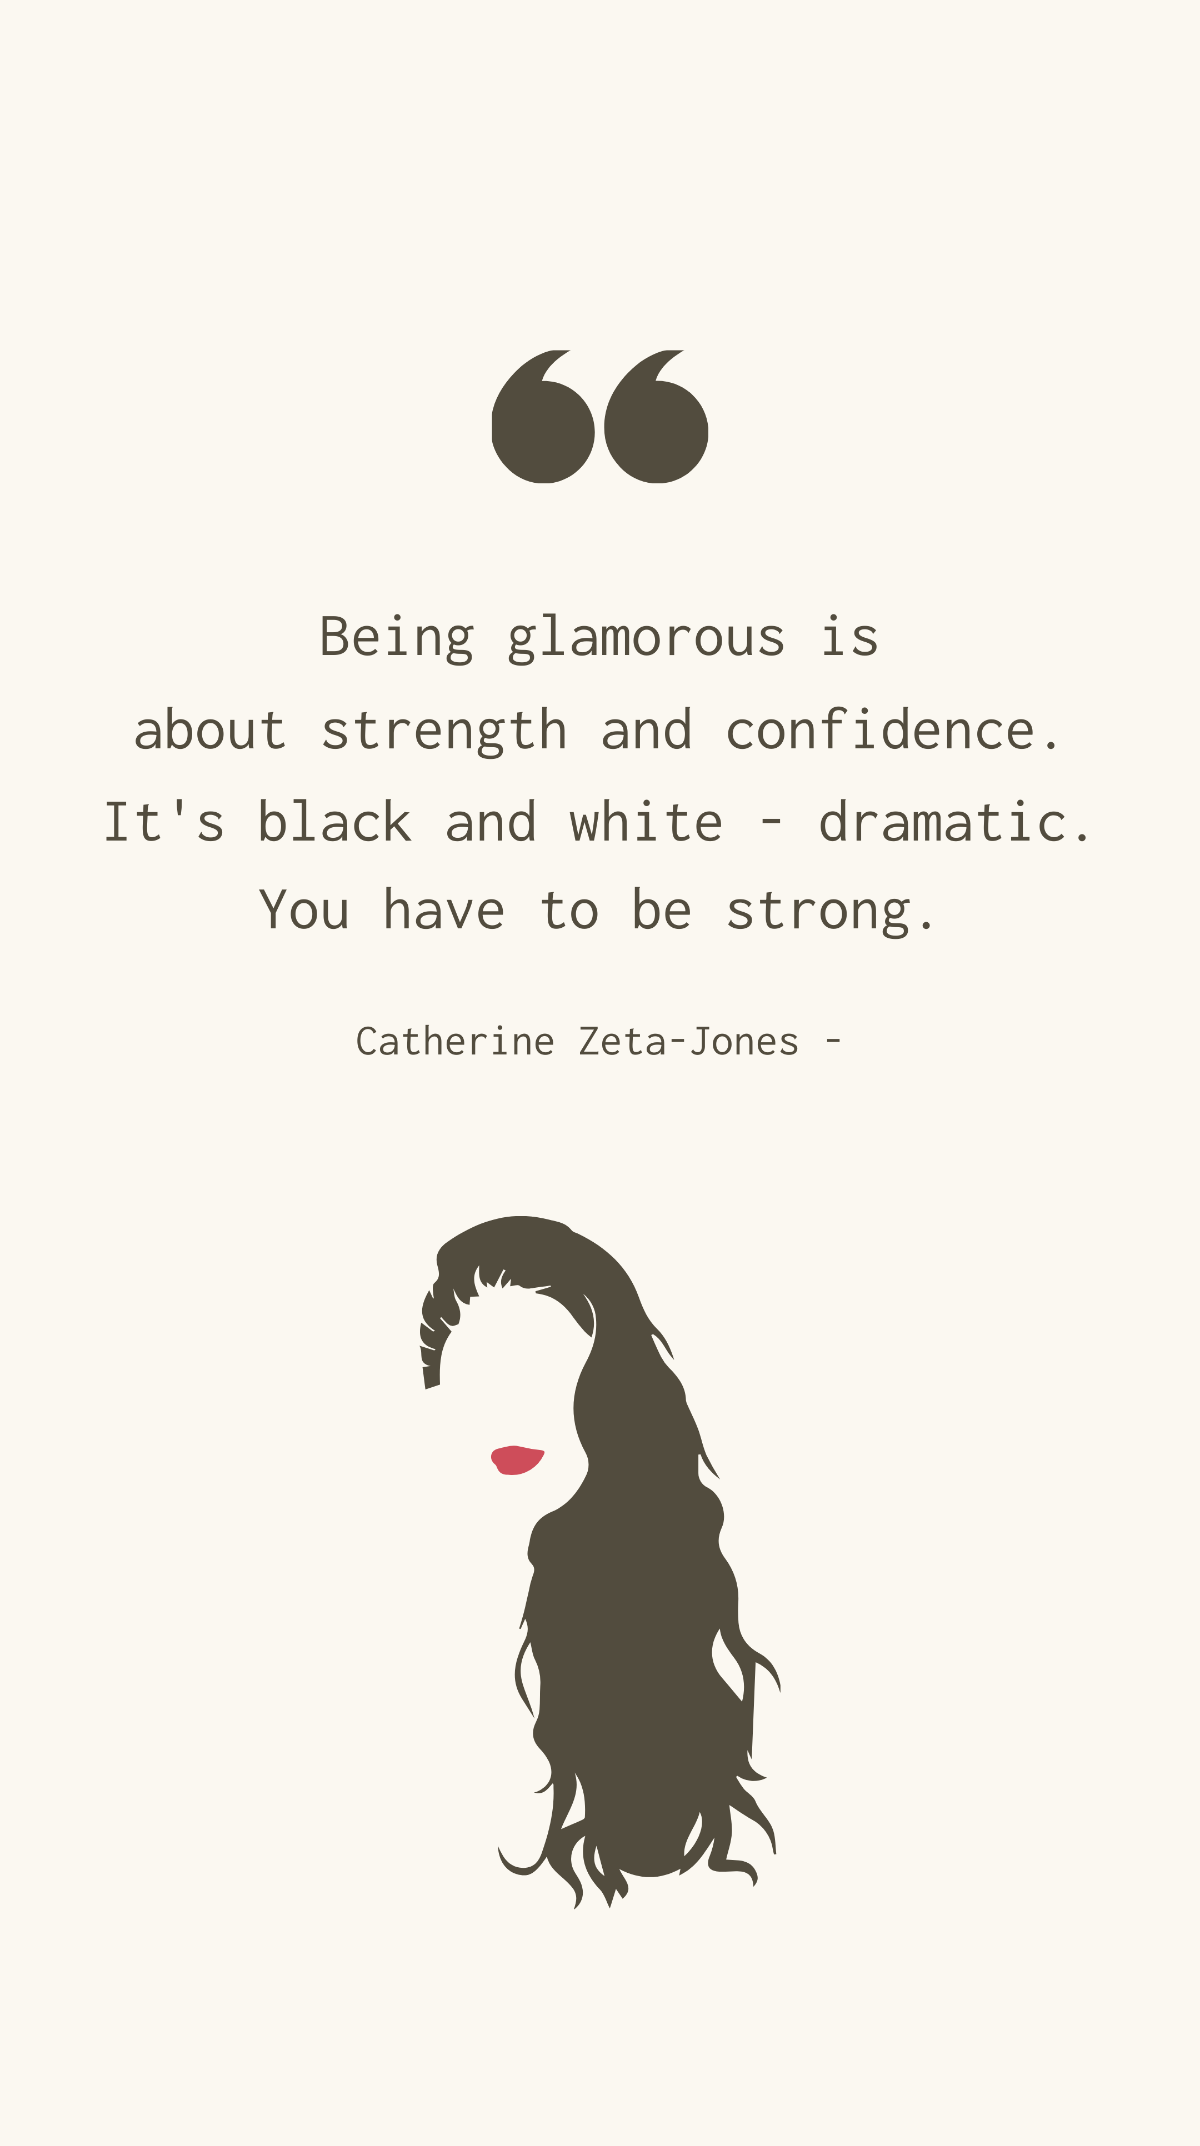 Catherine Zeta-Jones - Being glamorous is about strength and confidence. It's black and white - dramatic. You have to be strong. Template